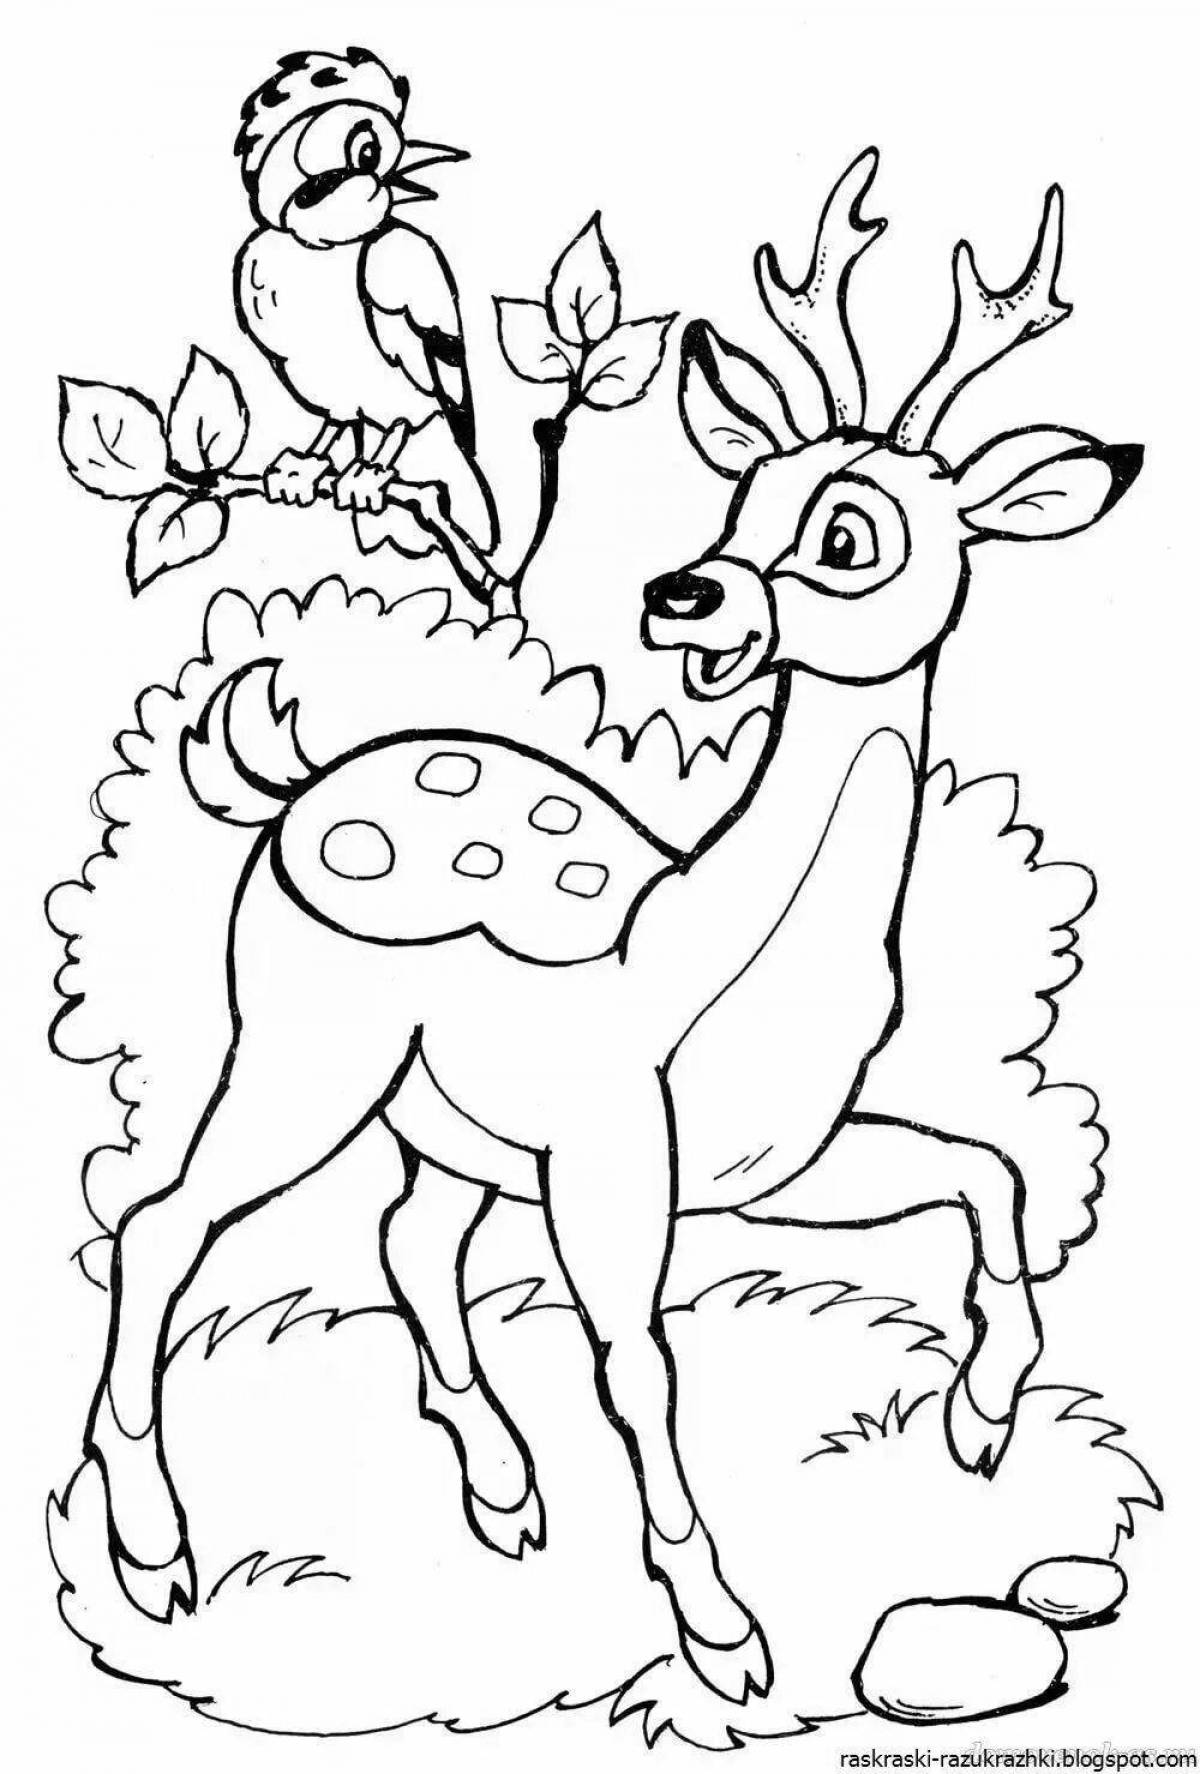 Fun coloring pages animals for 7 year olds